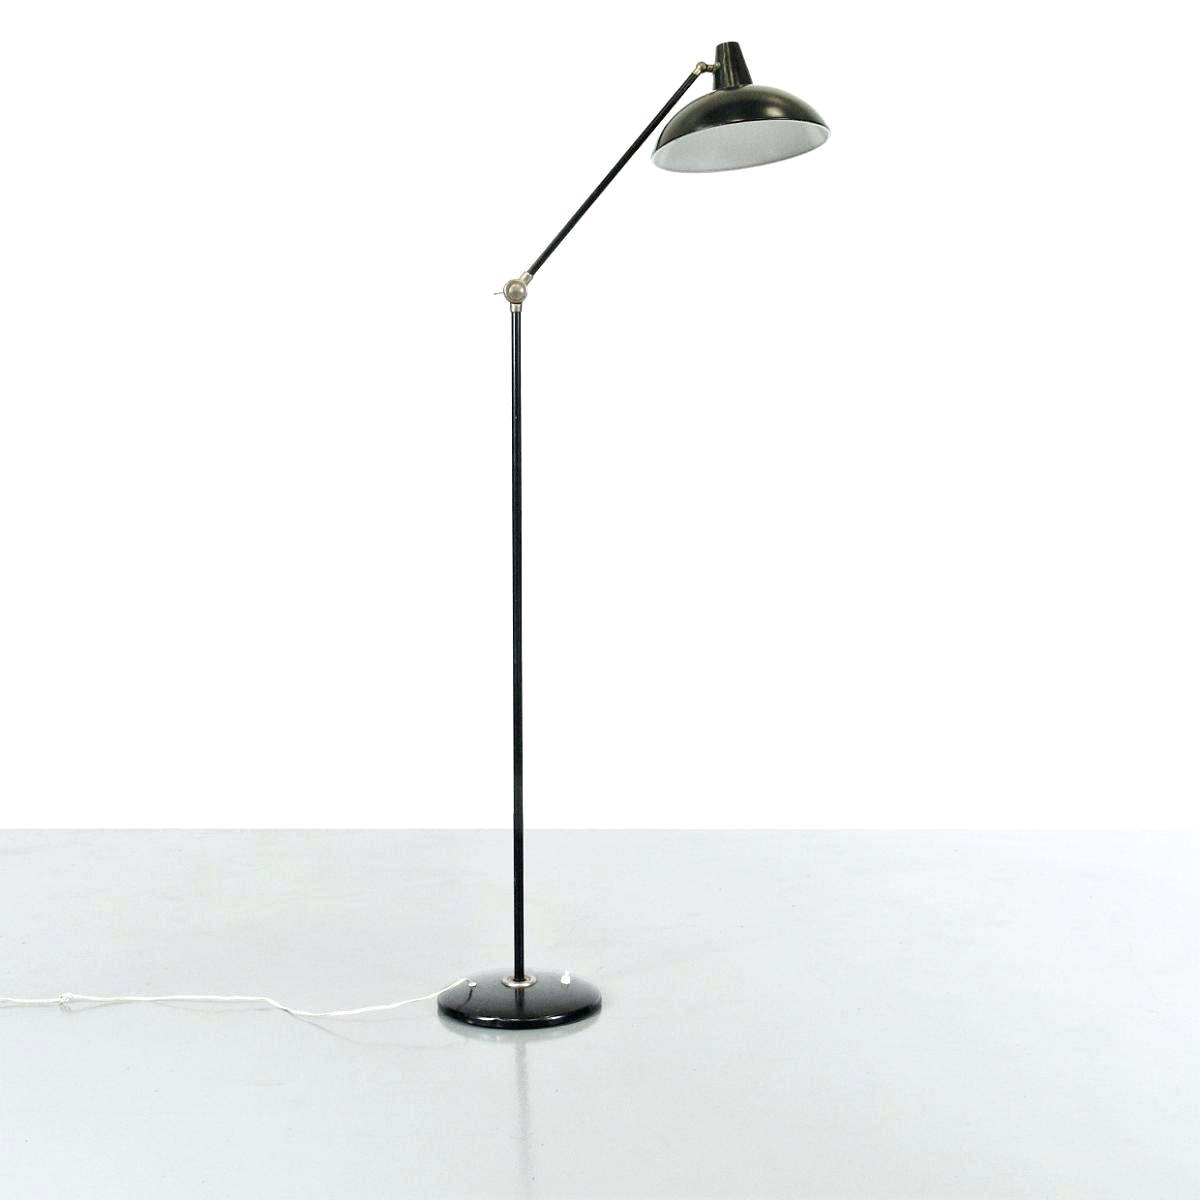 Awesome Simpson 4 Light Floor Lamp And Design Classic for proportions 1200 X 1200